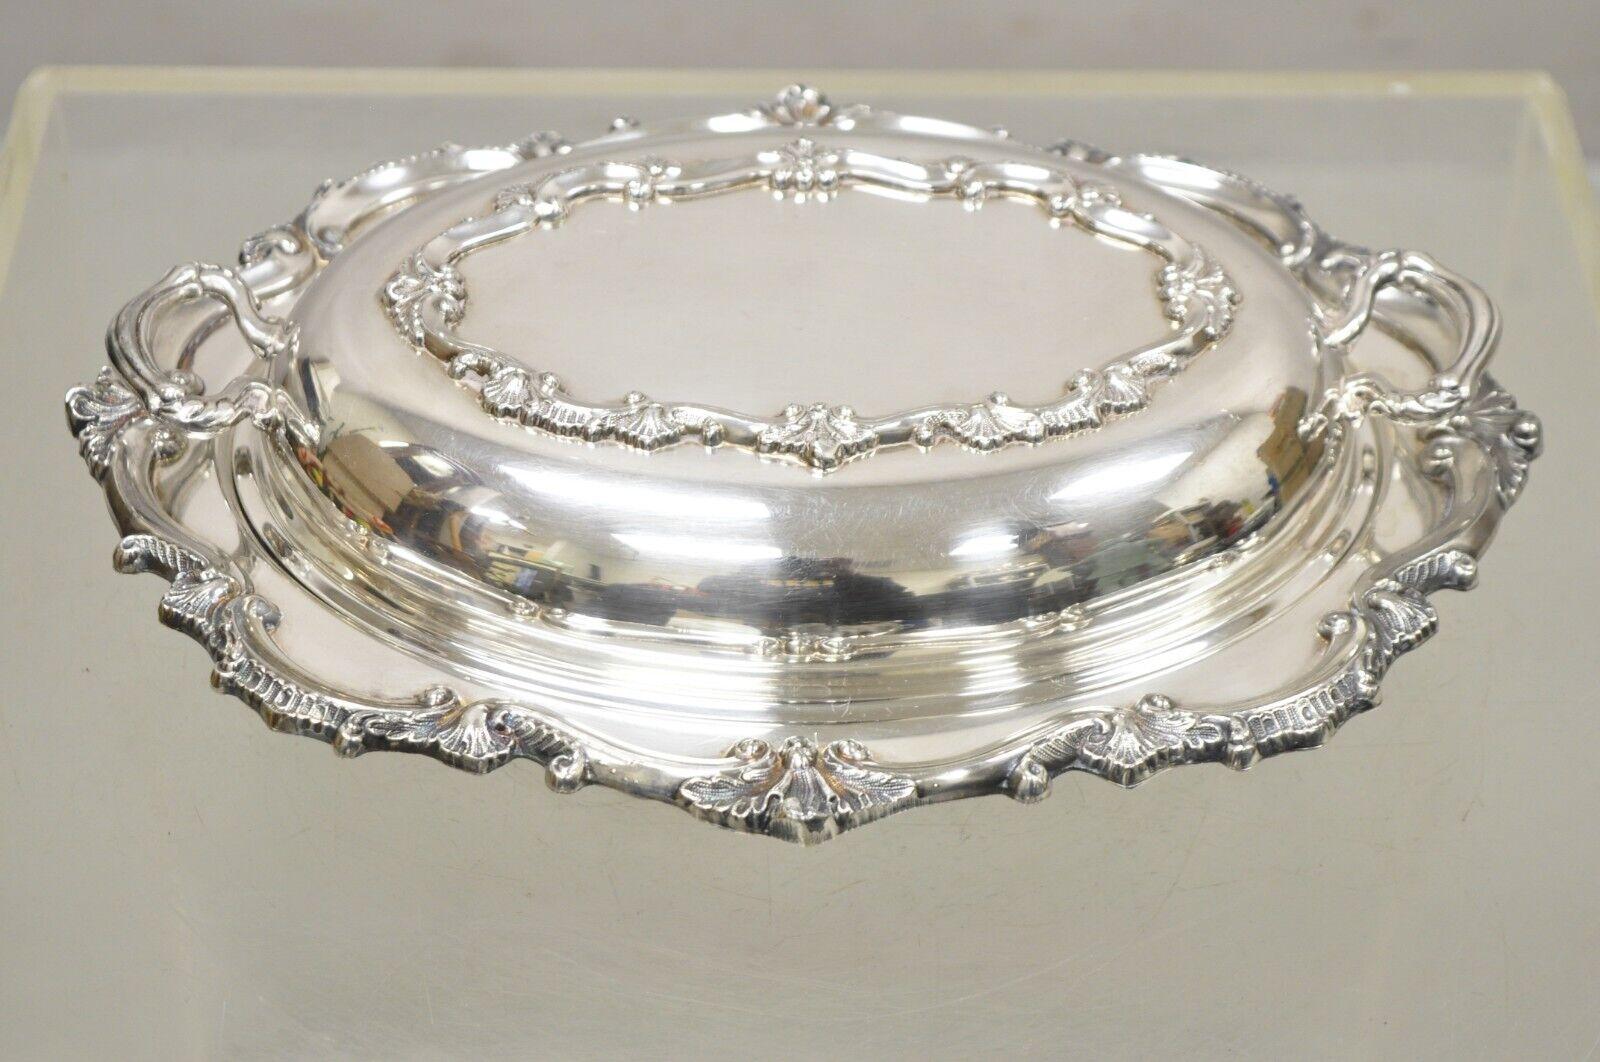 Vintage Victorian Style Silver Plated Lidded Ornate Serving Dish Bristol Silver by Poole. Item features ornate twin handles, fancy lid, original hallmark. circa Mid-20th century. Measurements: 3.5